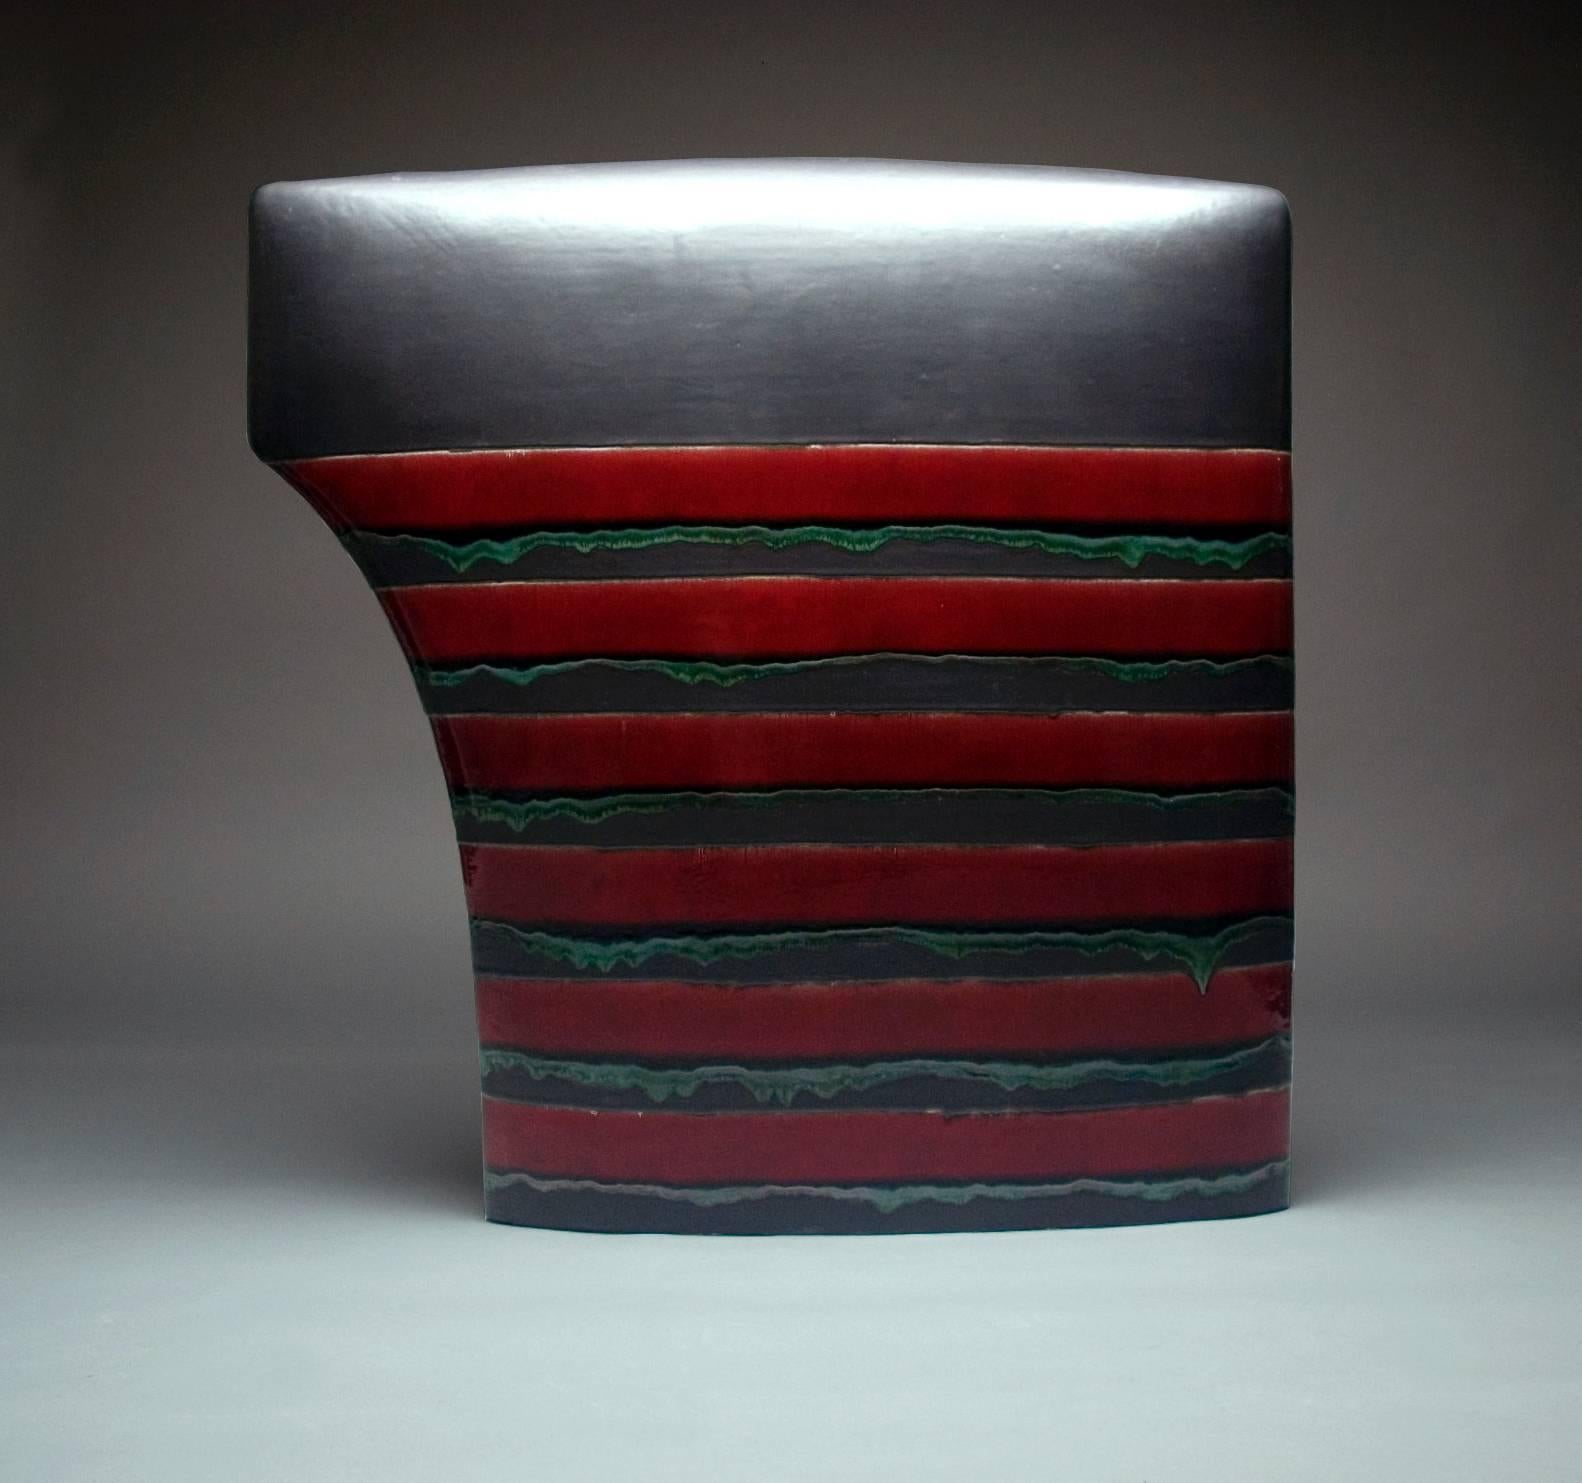 Dimensions: 33" x 32" x 6"
Materials: Ceramic and Glaze
Red Black No. 362

James Marshall is a highly successful exhibiting artist, designer and art educator whose education in the ceramic arts began with a pottery apprenticeship in Guatemala